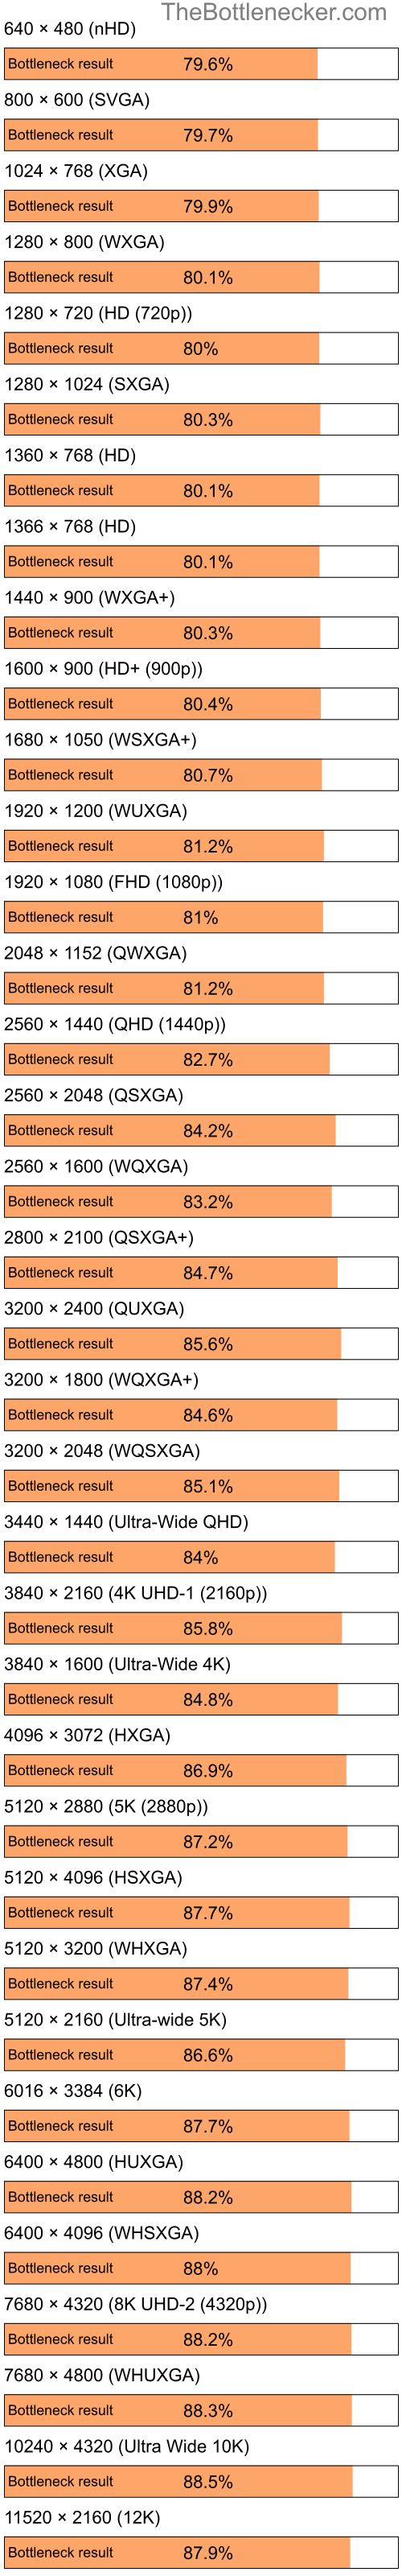 Bottleneck results by resolution for Intel Pentium 4 and AMD Radeon 9600 PRO Family in General Tasks